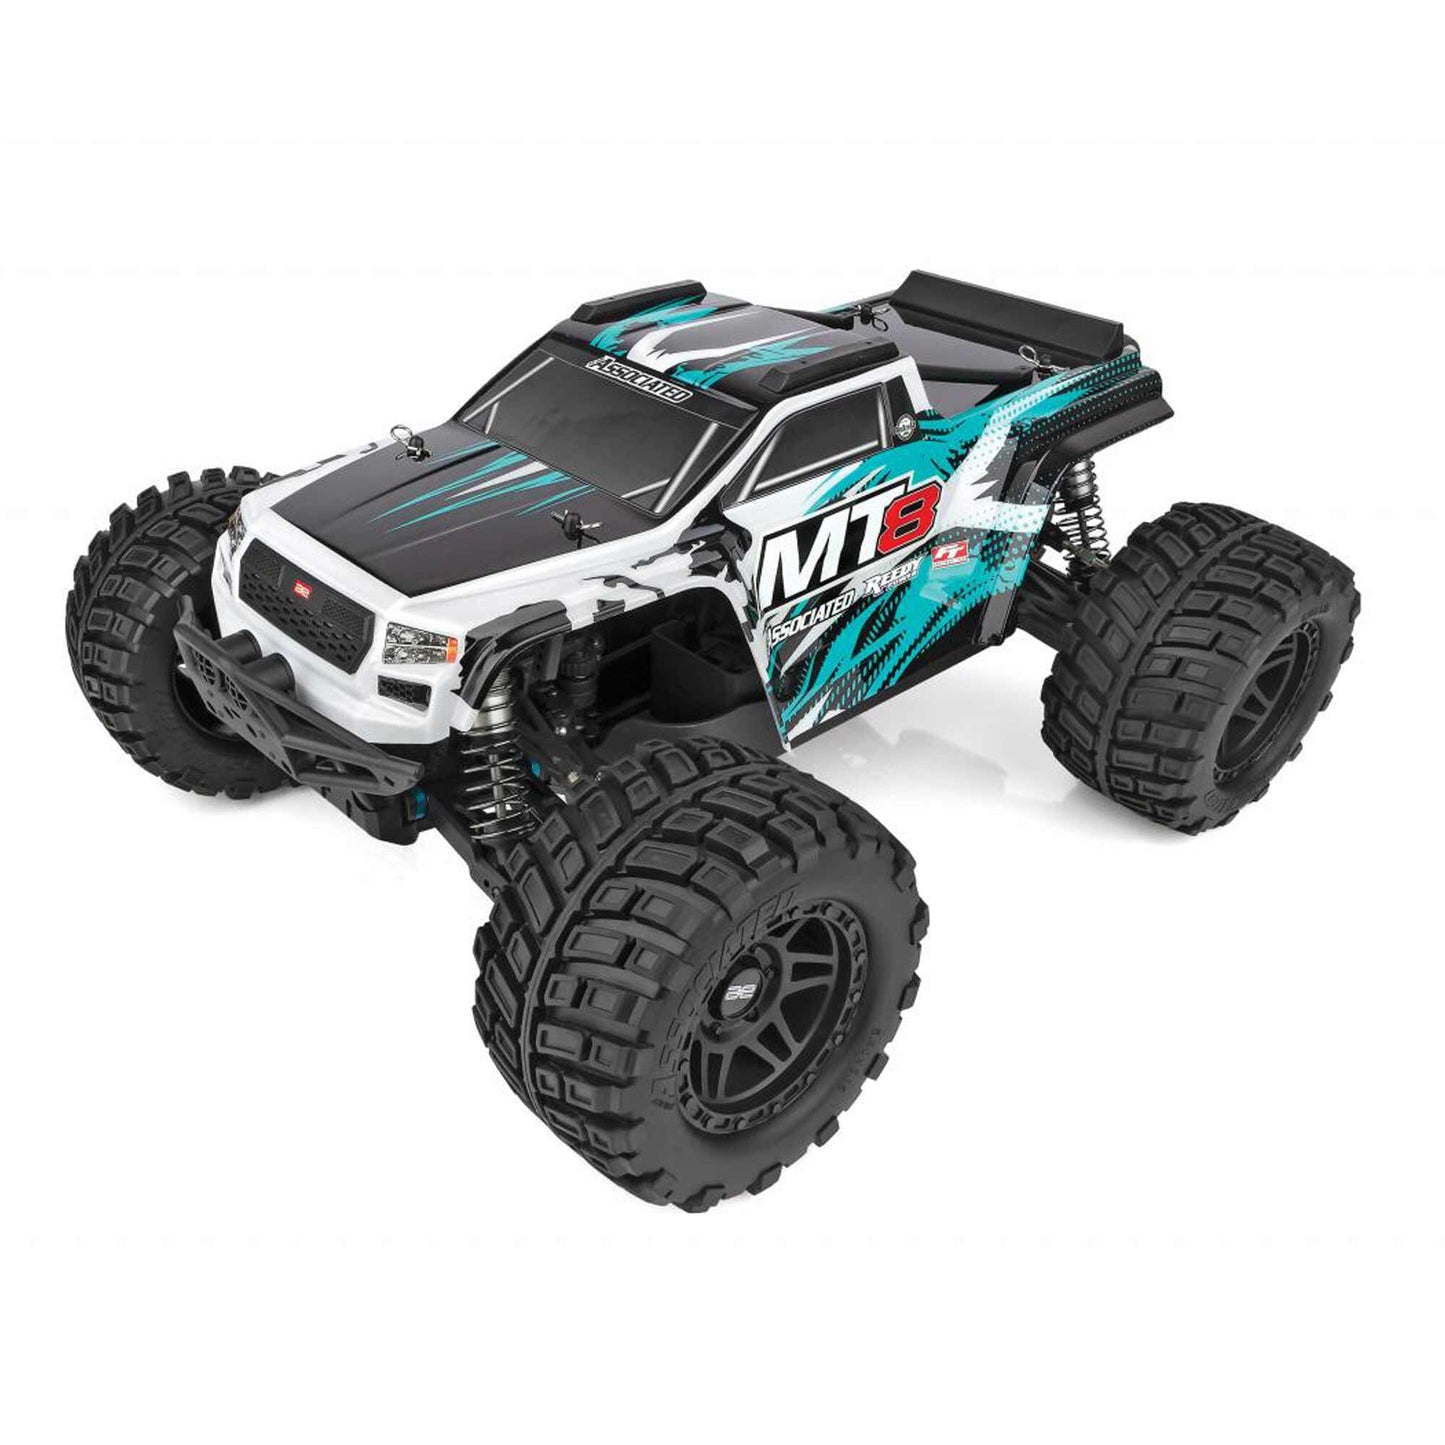 1/8 Rival MT8 4X4 Monster Truck RTR  Teal LiPo Combo